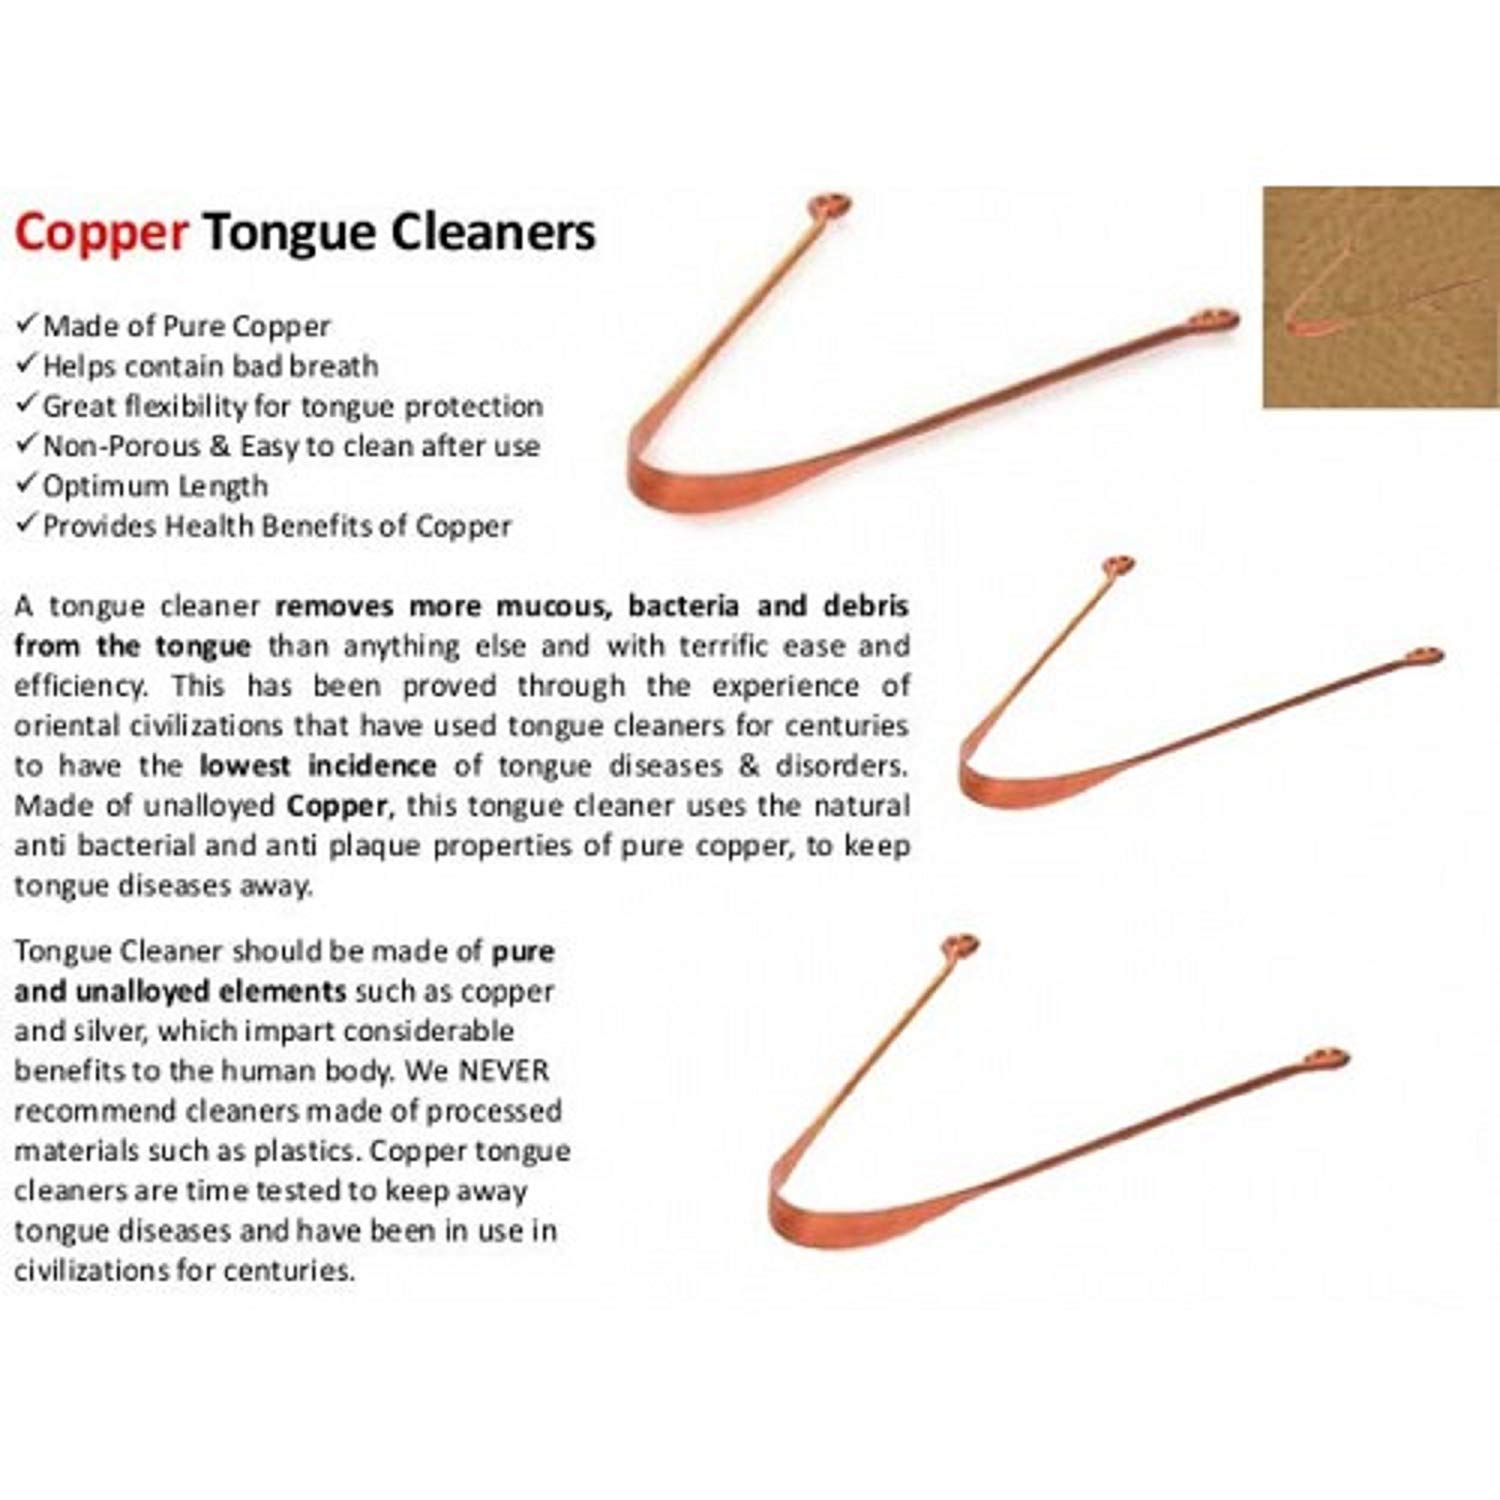 NJ Copper Tongue Cleaner ECO, Ayurvedic Tongue Cleaner made of Pure Copper for Daily Oral Dental Hygiene Fresh Breath and Health: 3 Pcs